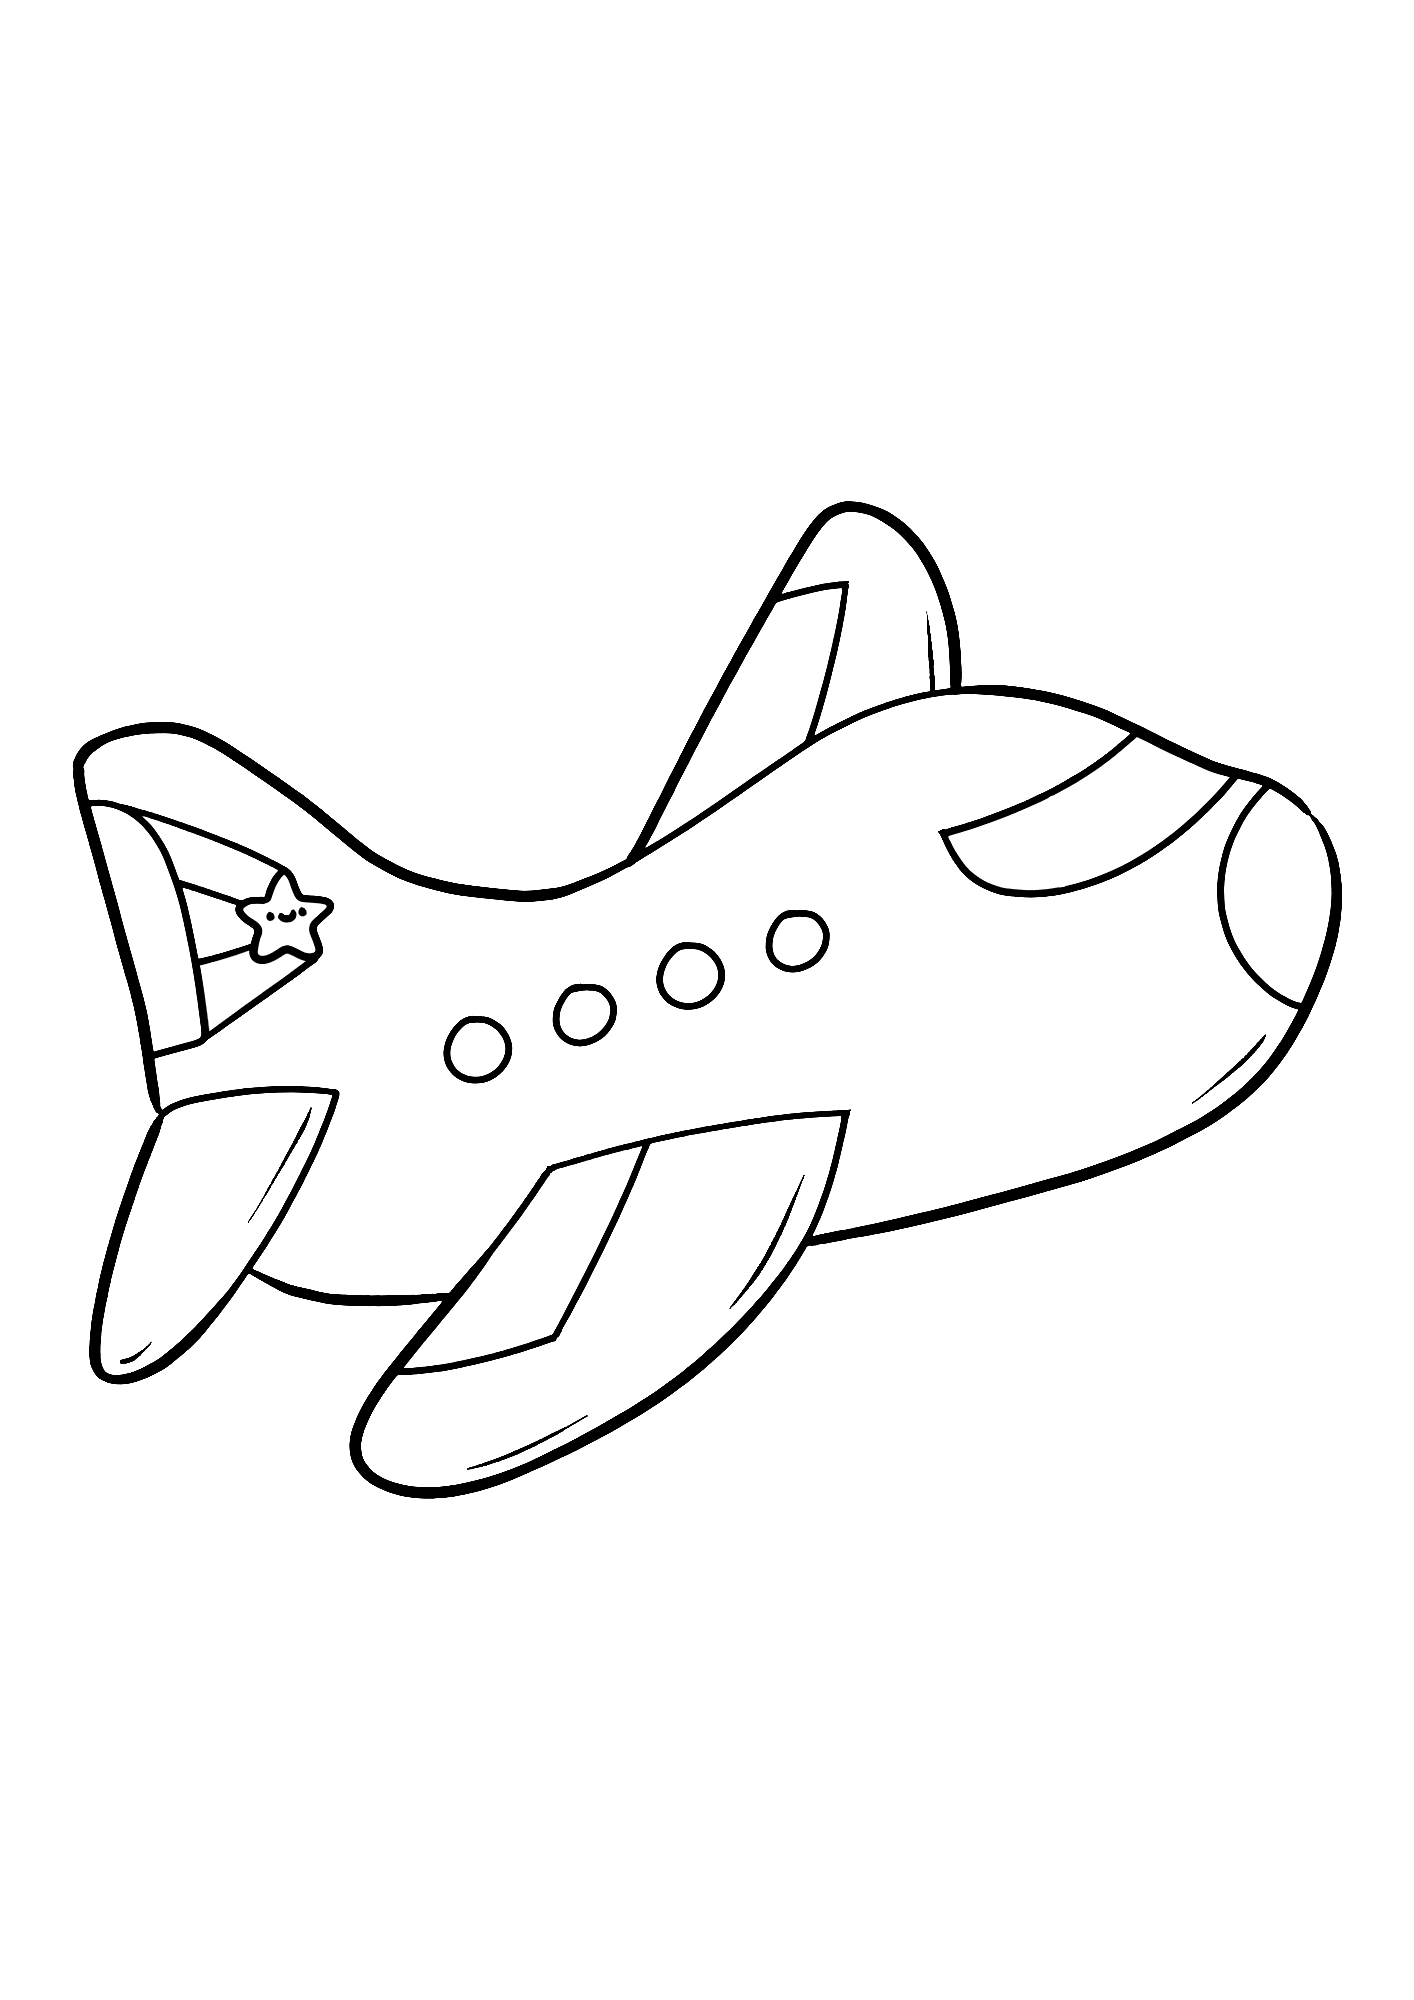 Airplane Picture Coloring Page